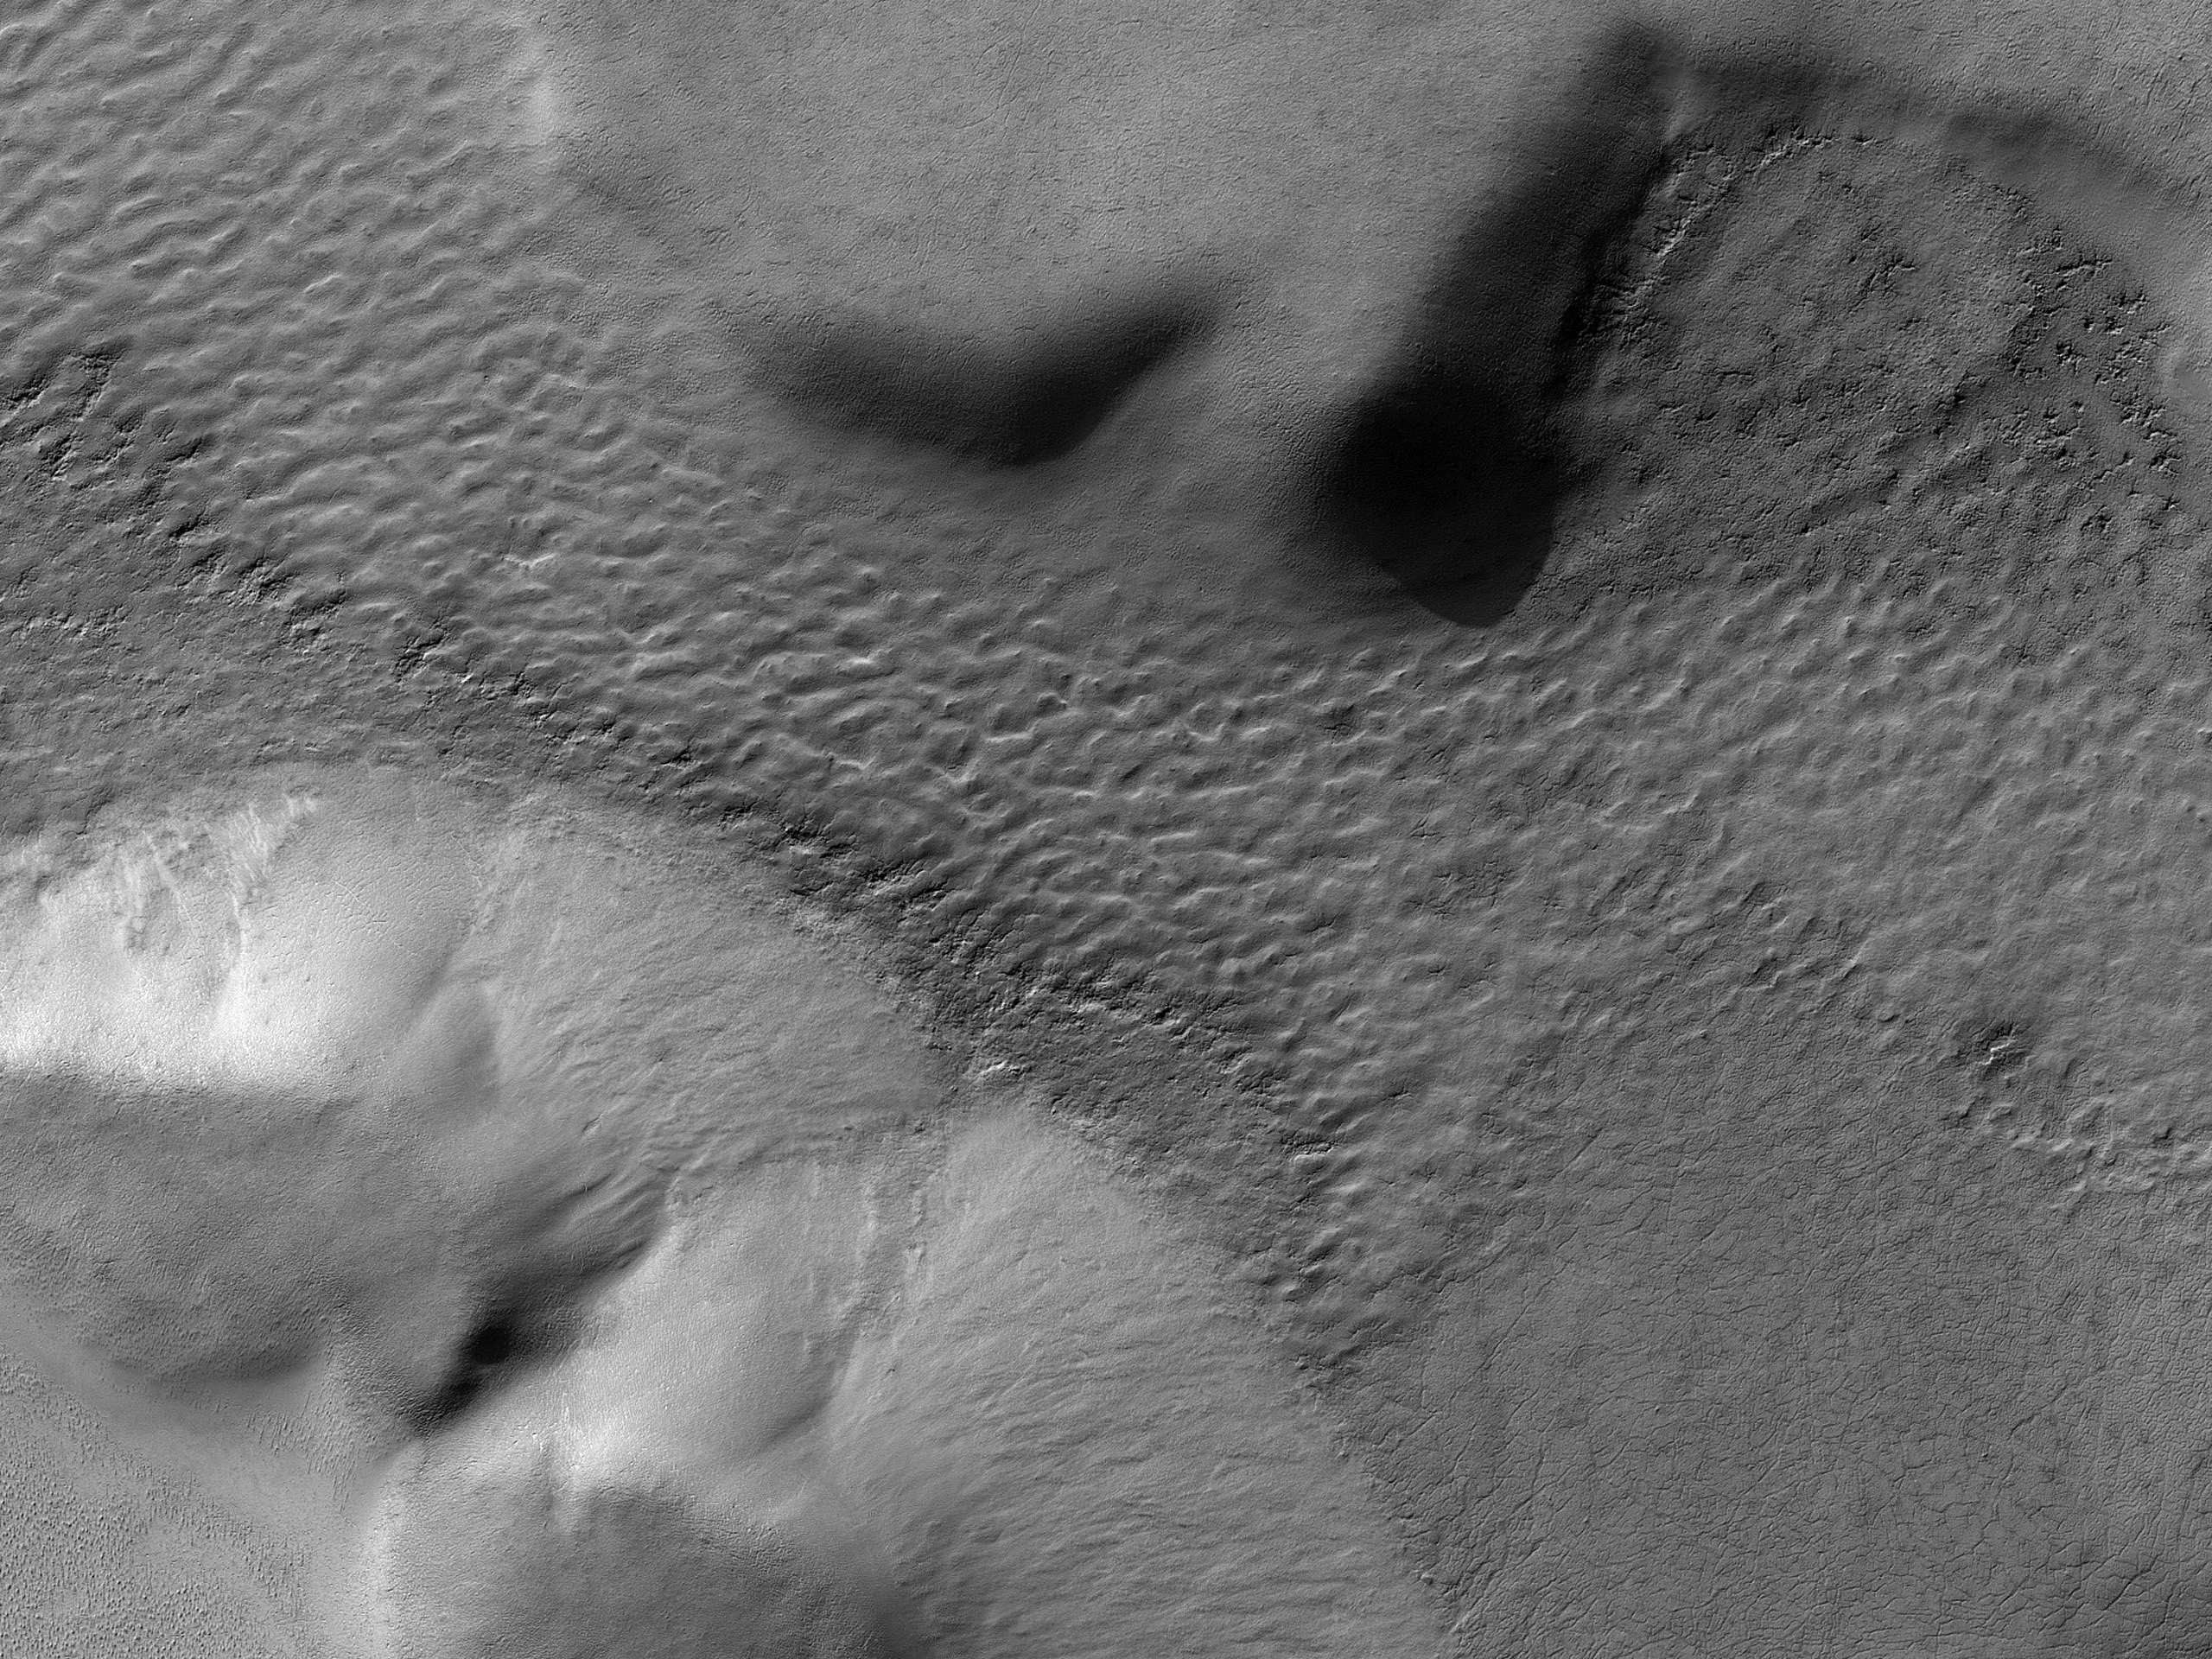 Depression Adjacent to Crater in South Polar Region